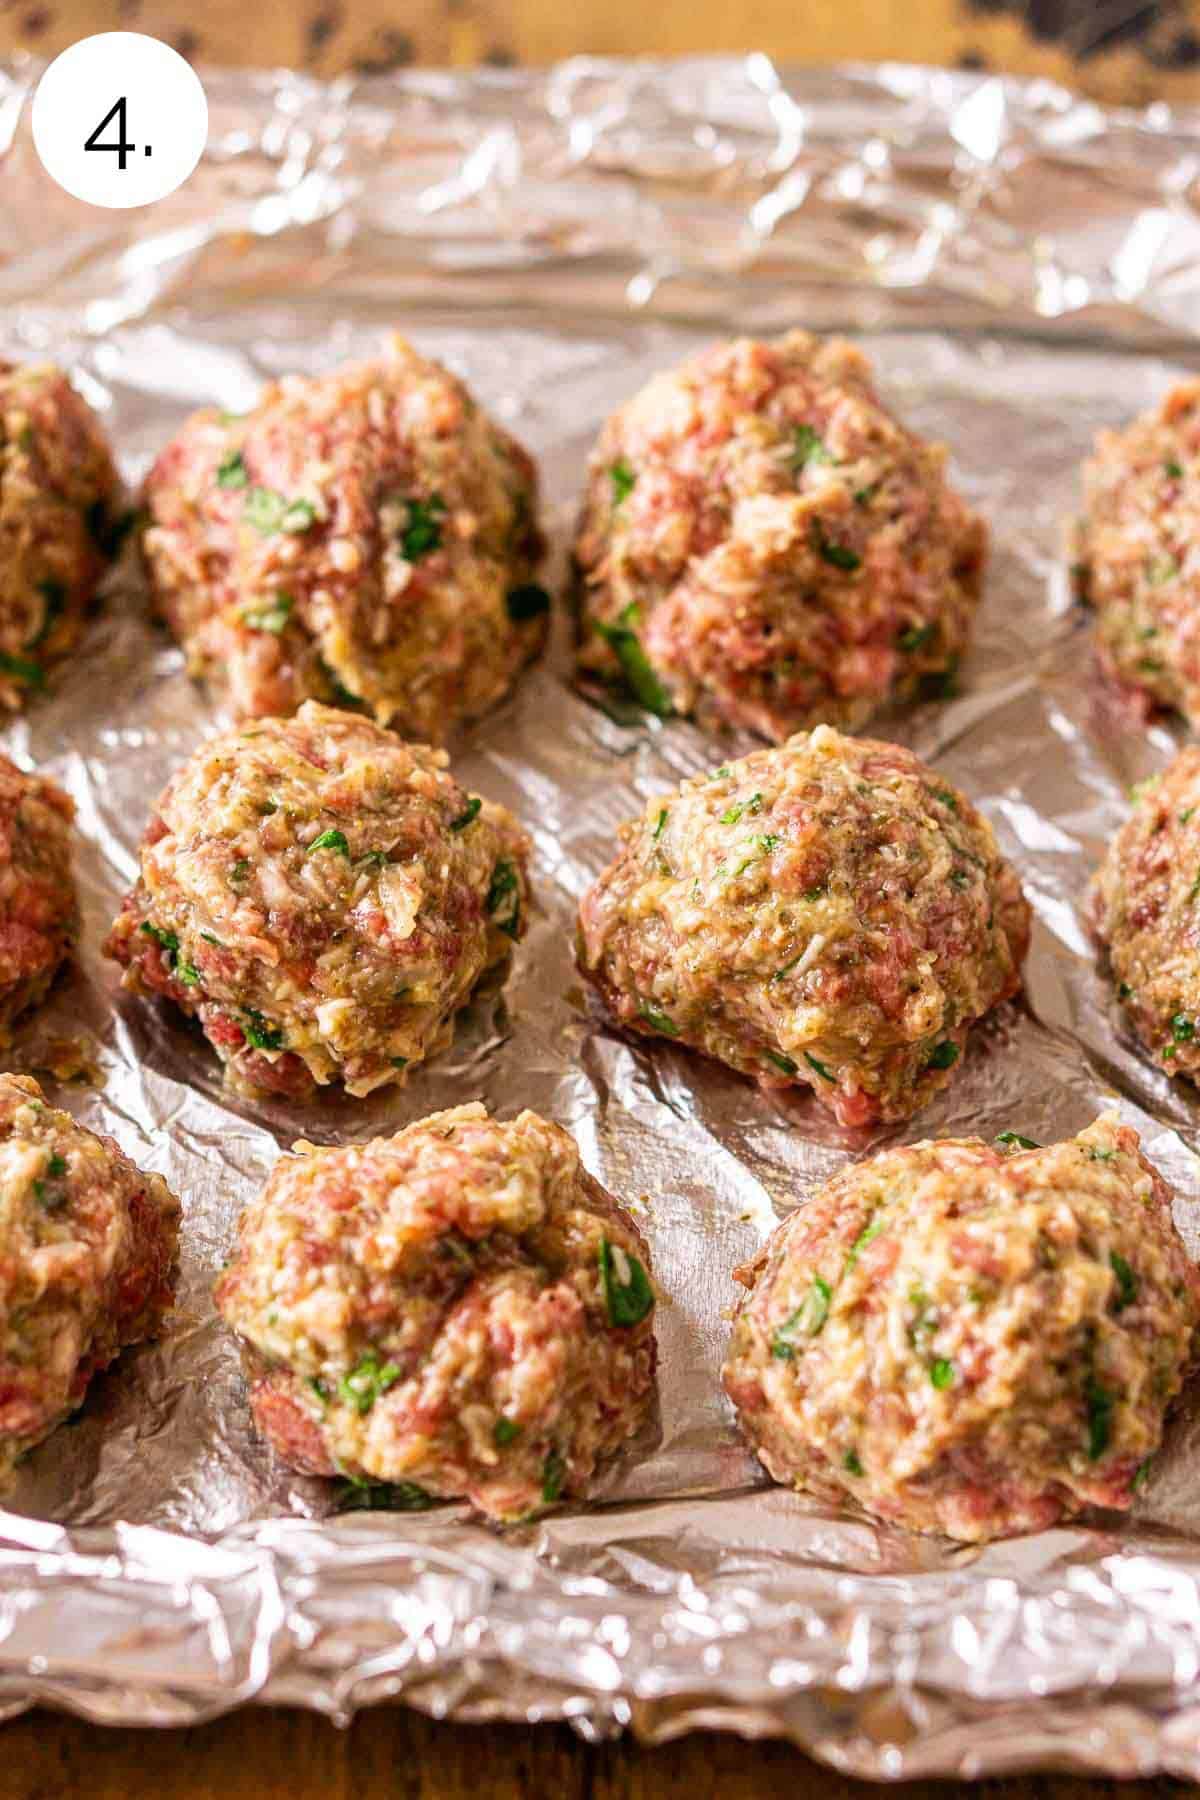 The uncooked meatballs on a baking sheet lined with aluminum foil before going into the smoker.